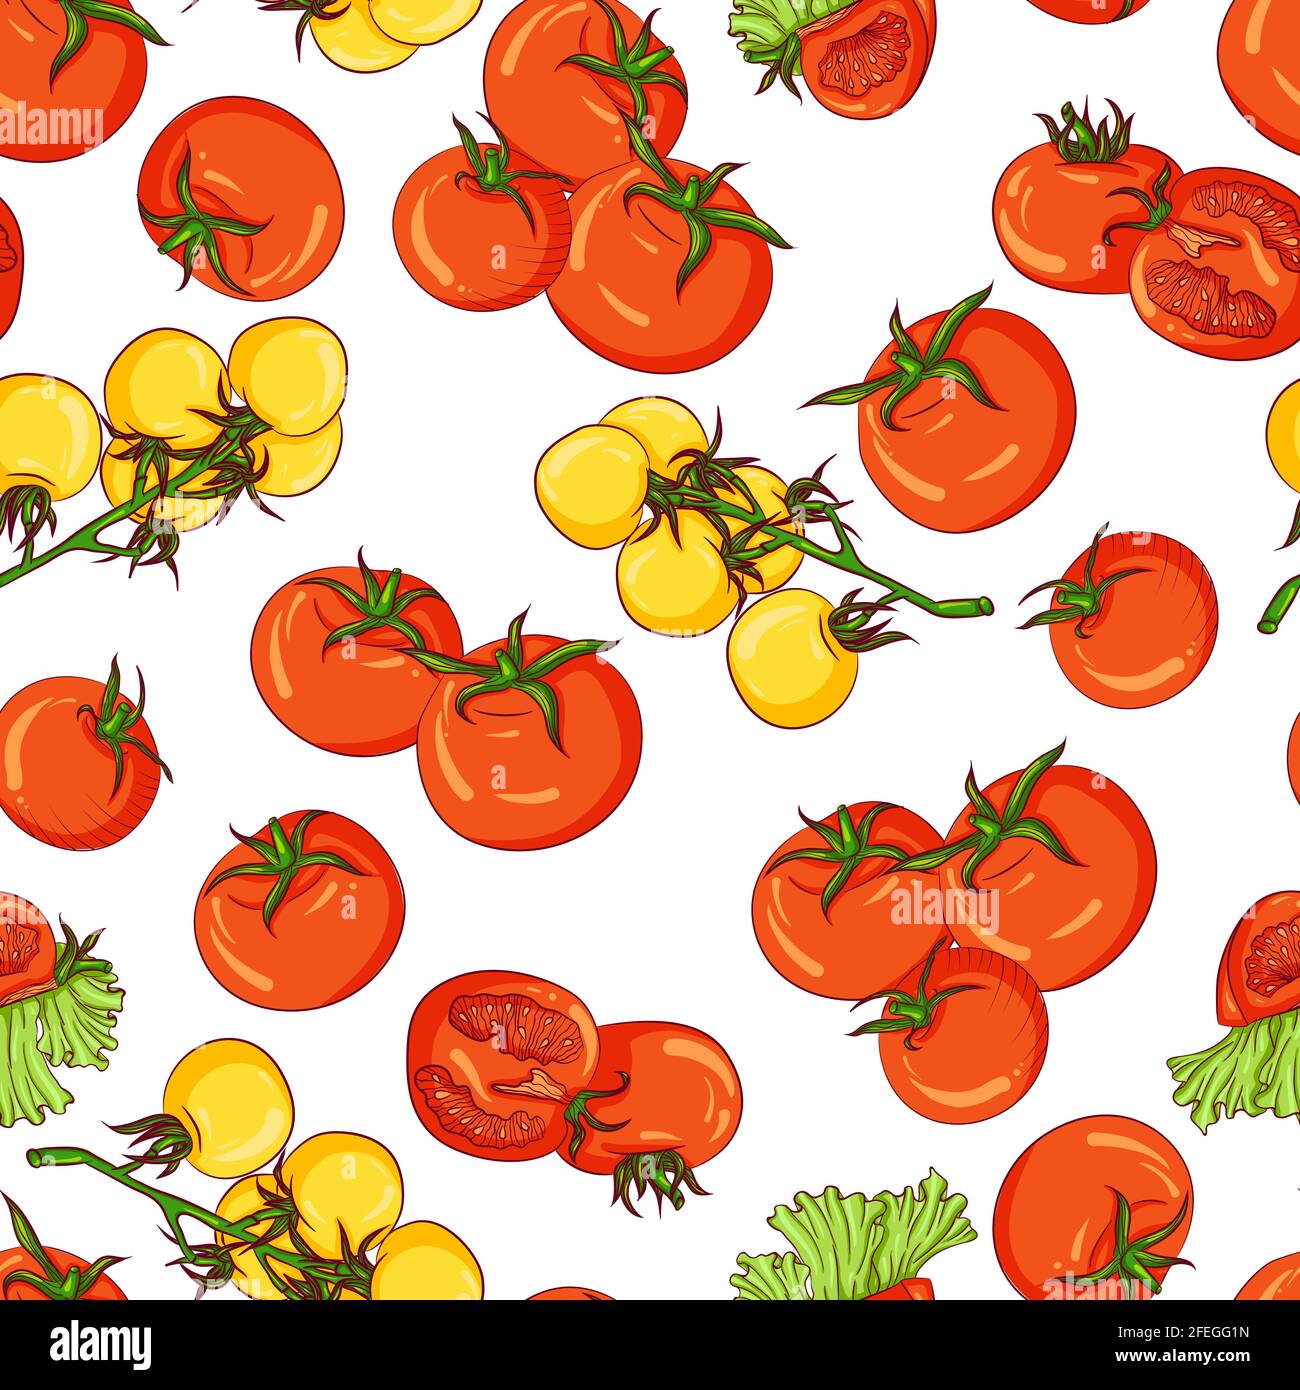 Seamless pattern tomatoes Stock Vector